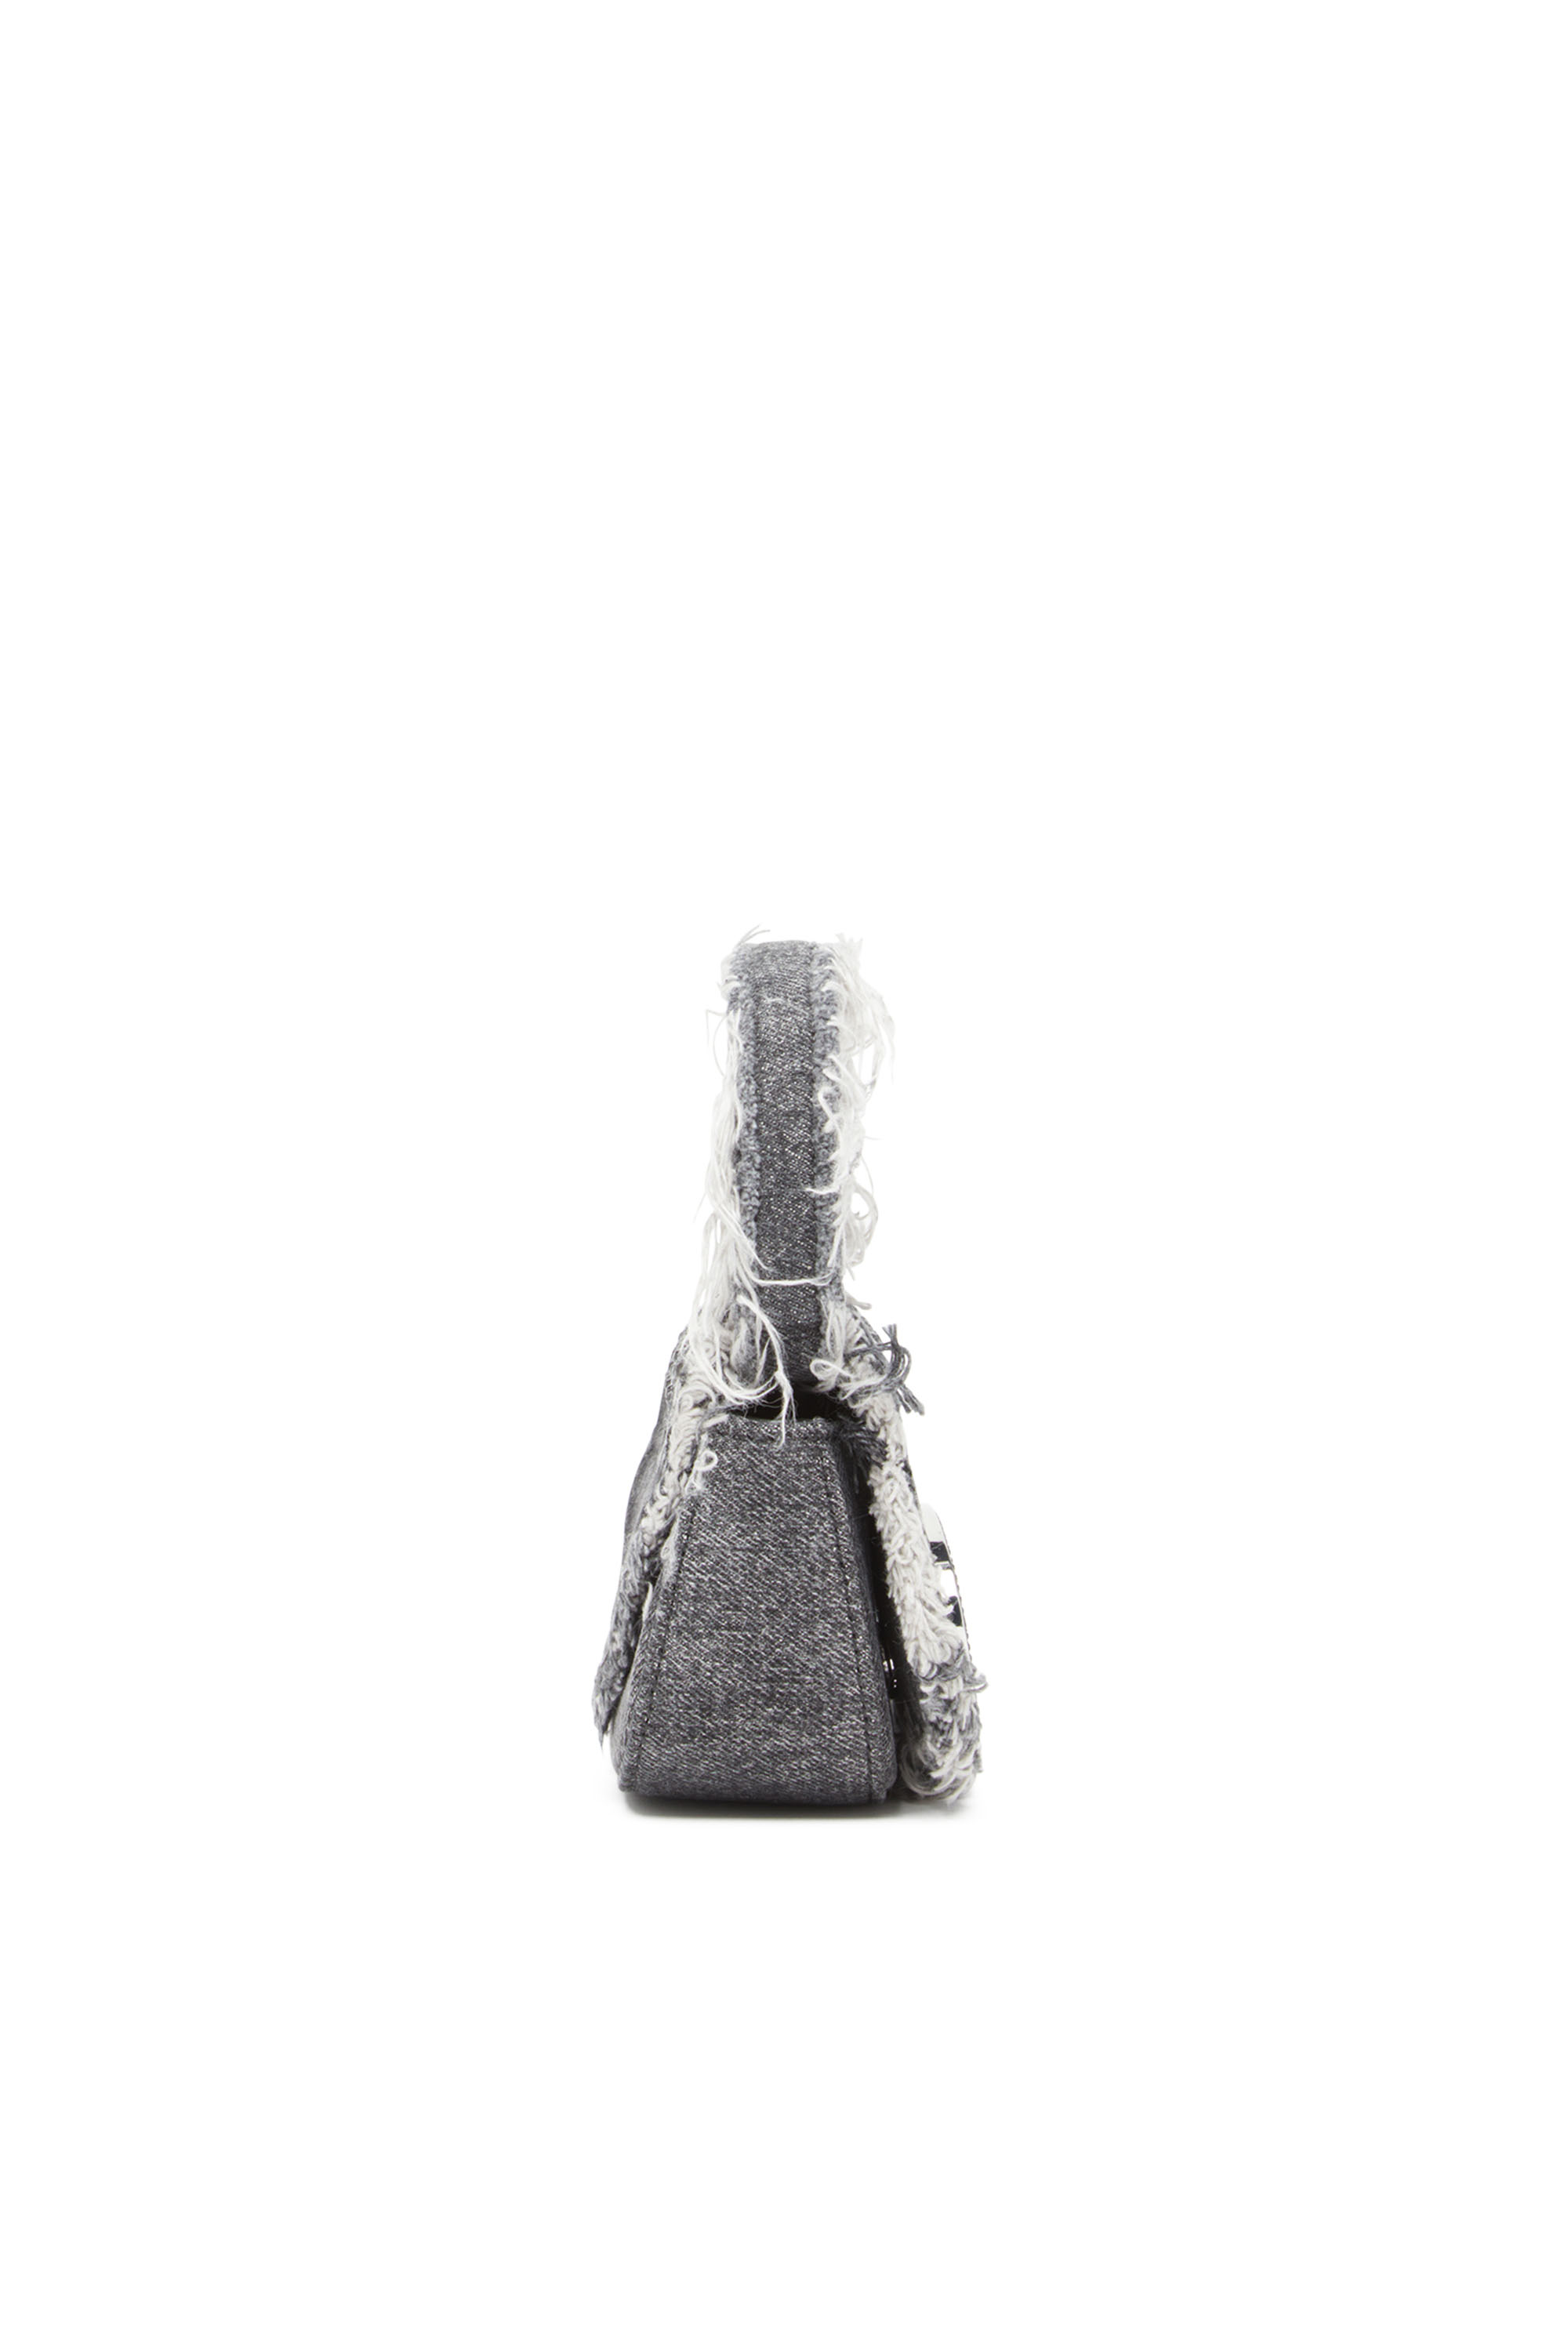 Diesel - 1DR XS, Female 1DR XS-Iconic mini bag in denim and crystals in ブラック - Image 3